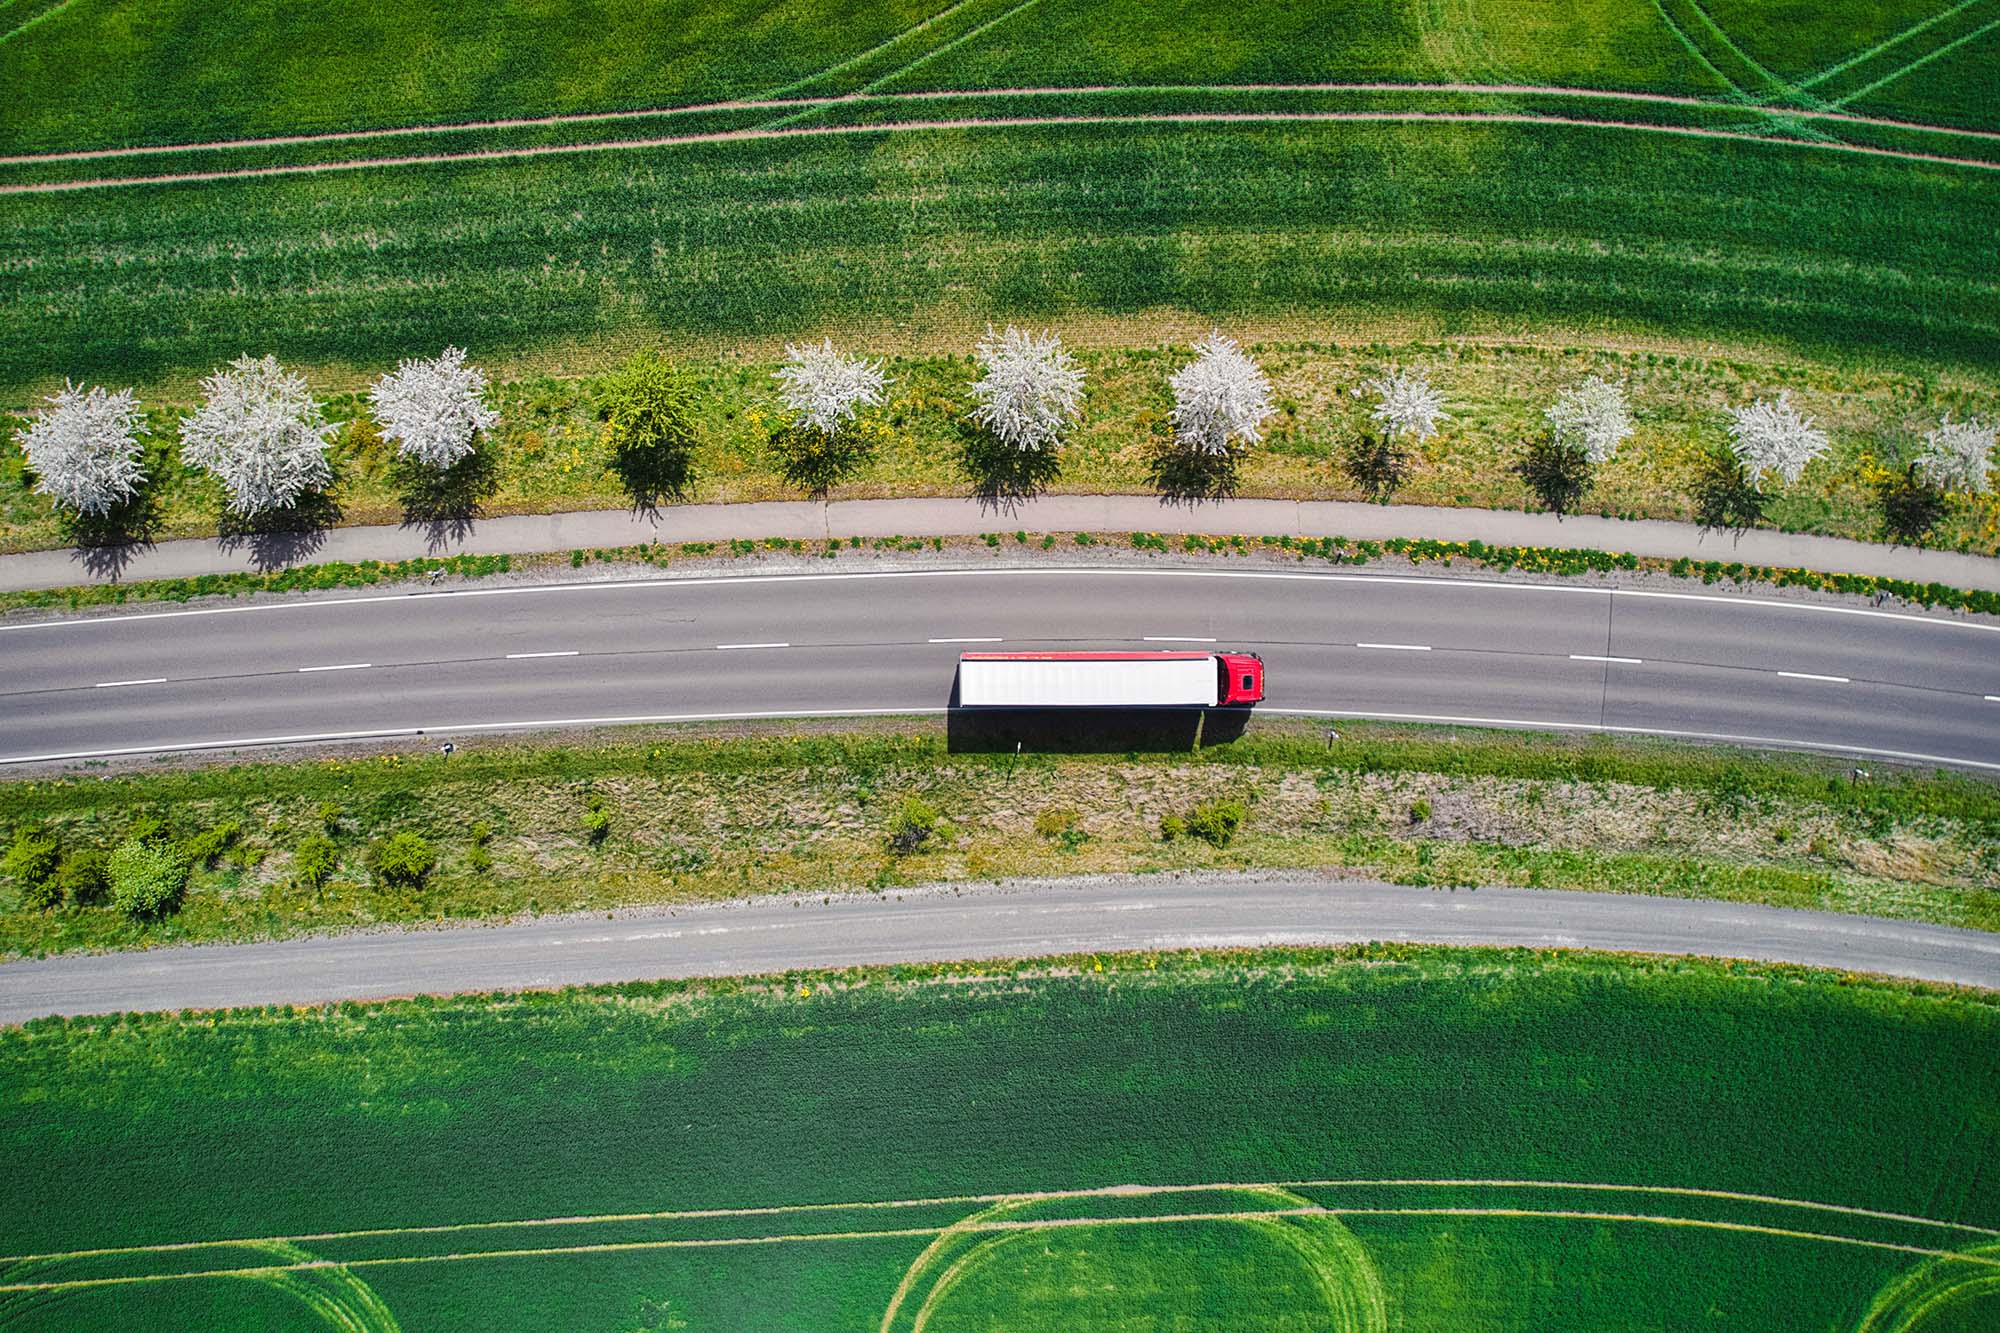 
A truck on a road in a green landscape.